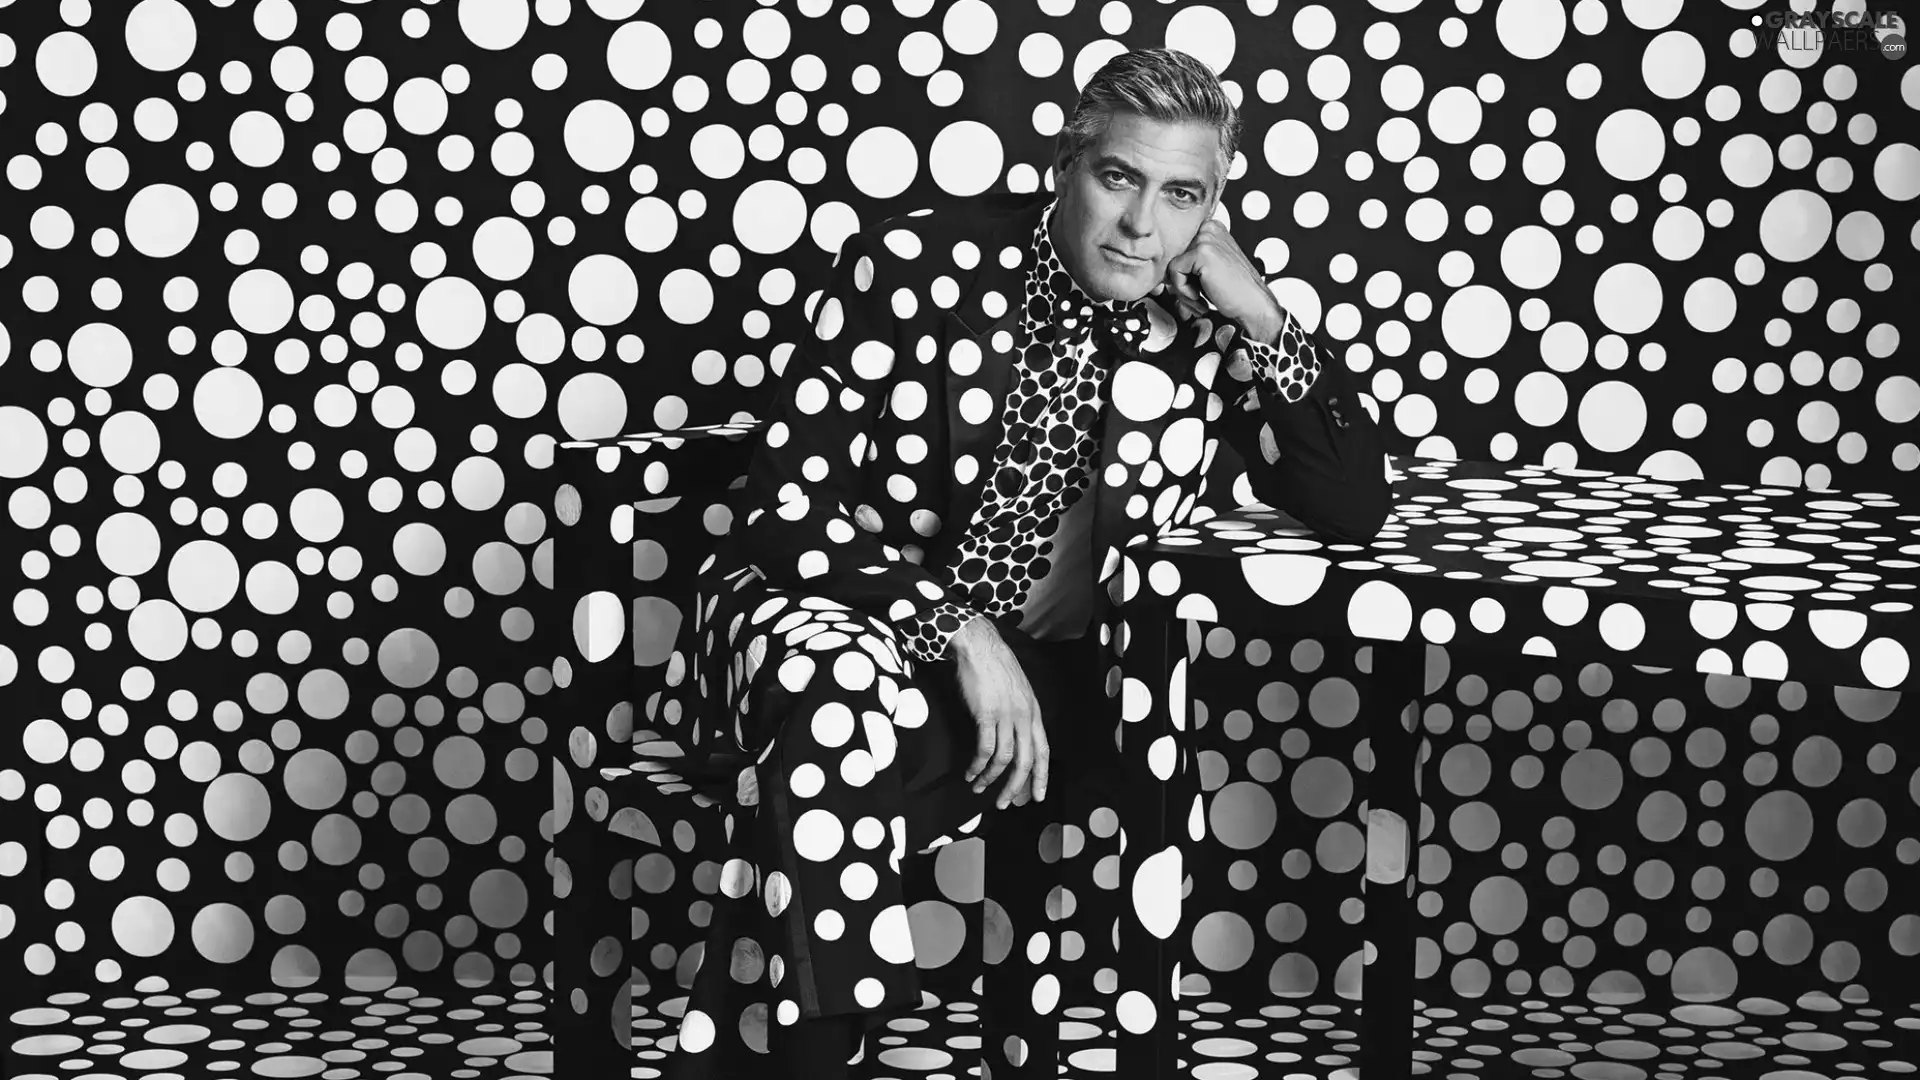 George Clooney, background, spots, costume